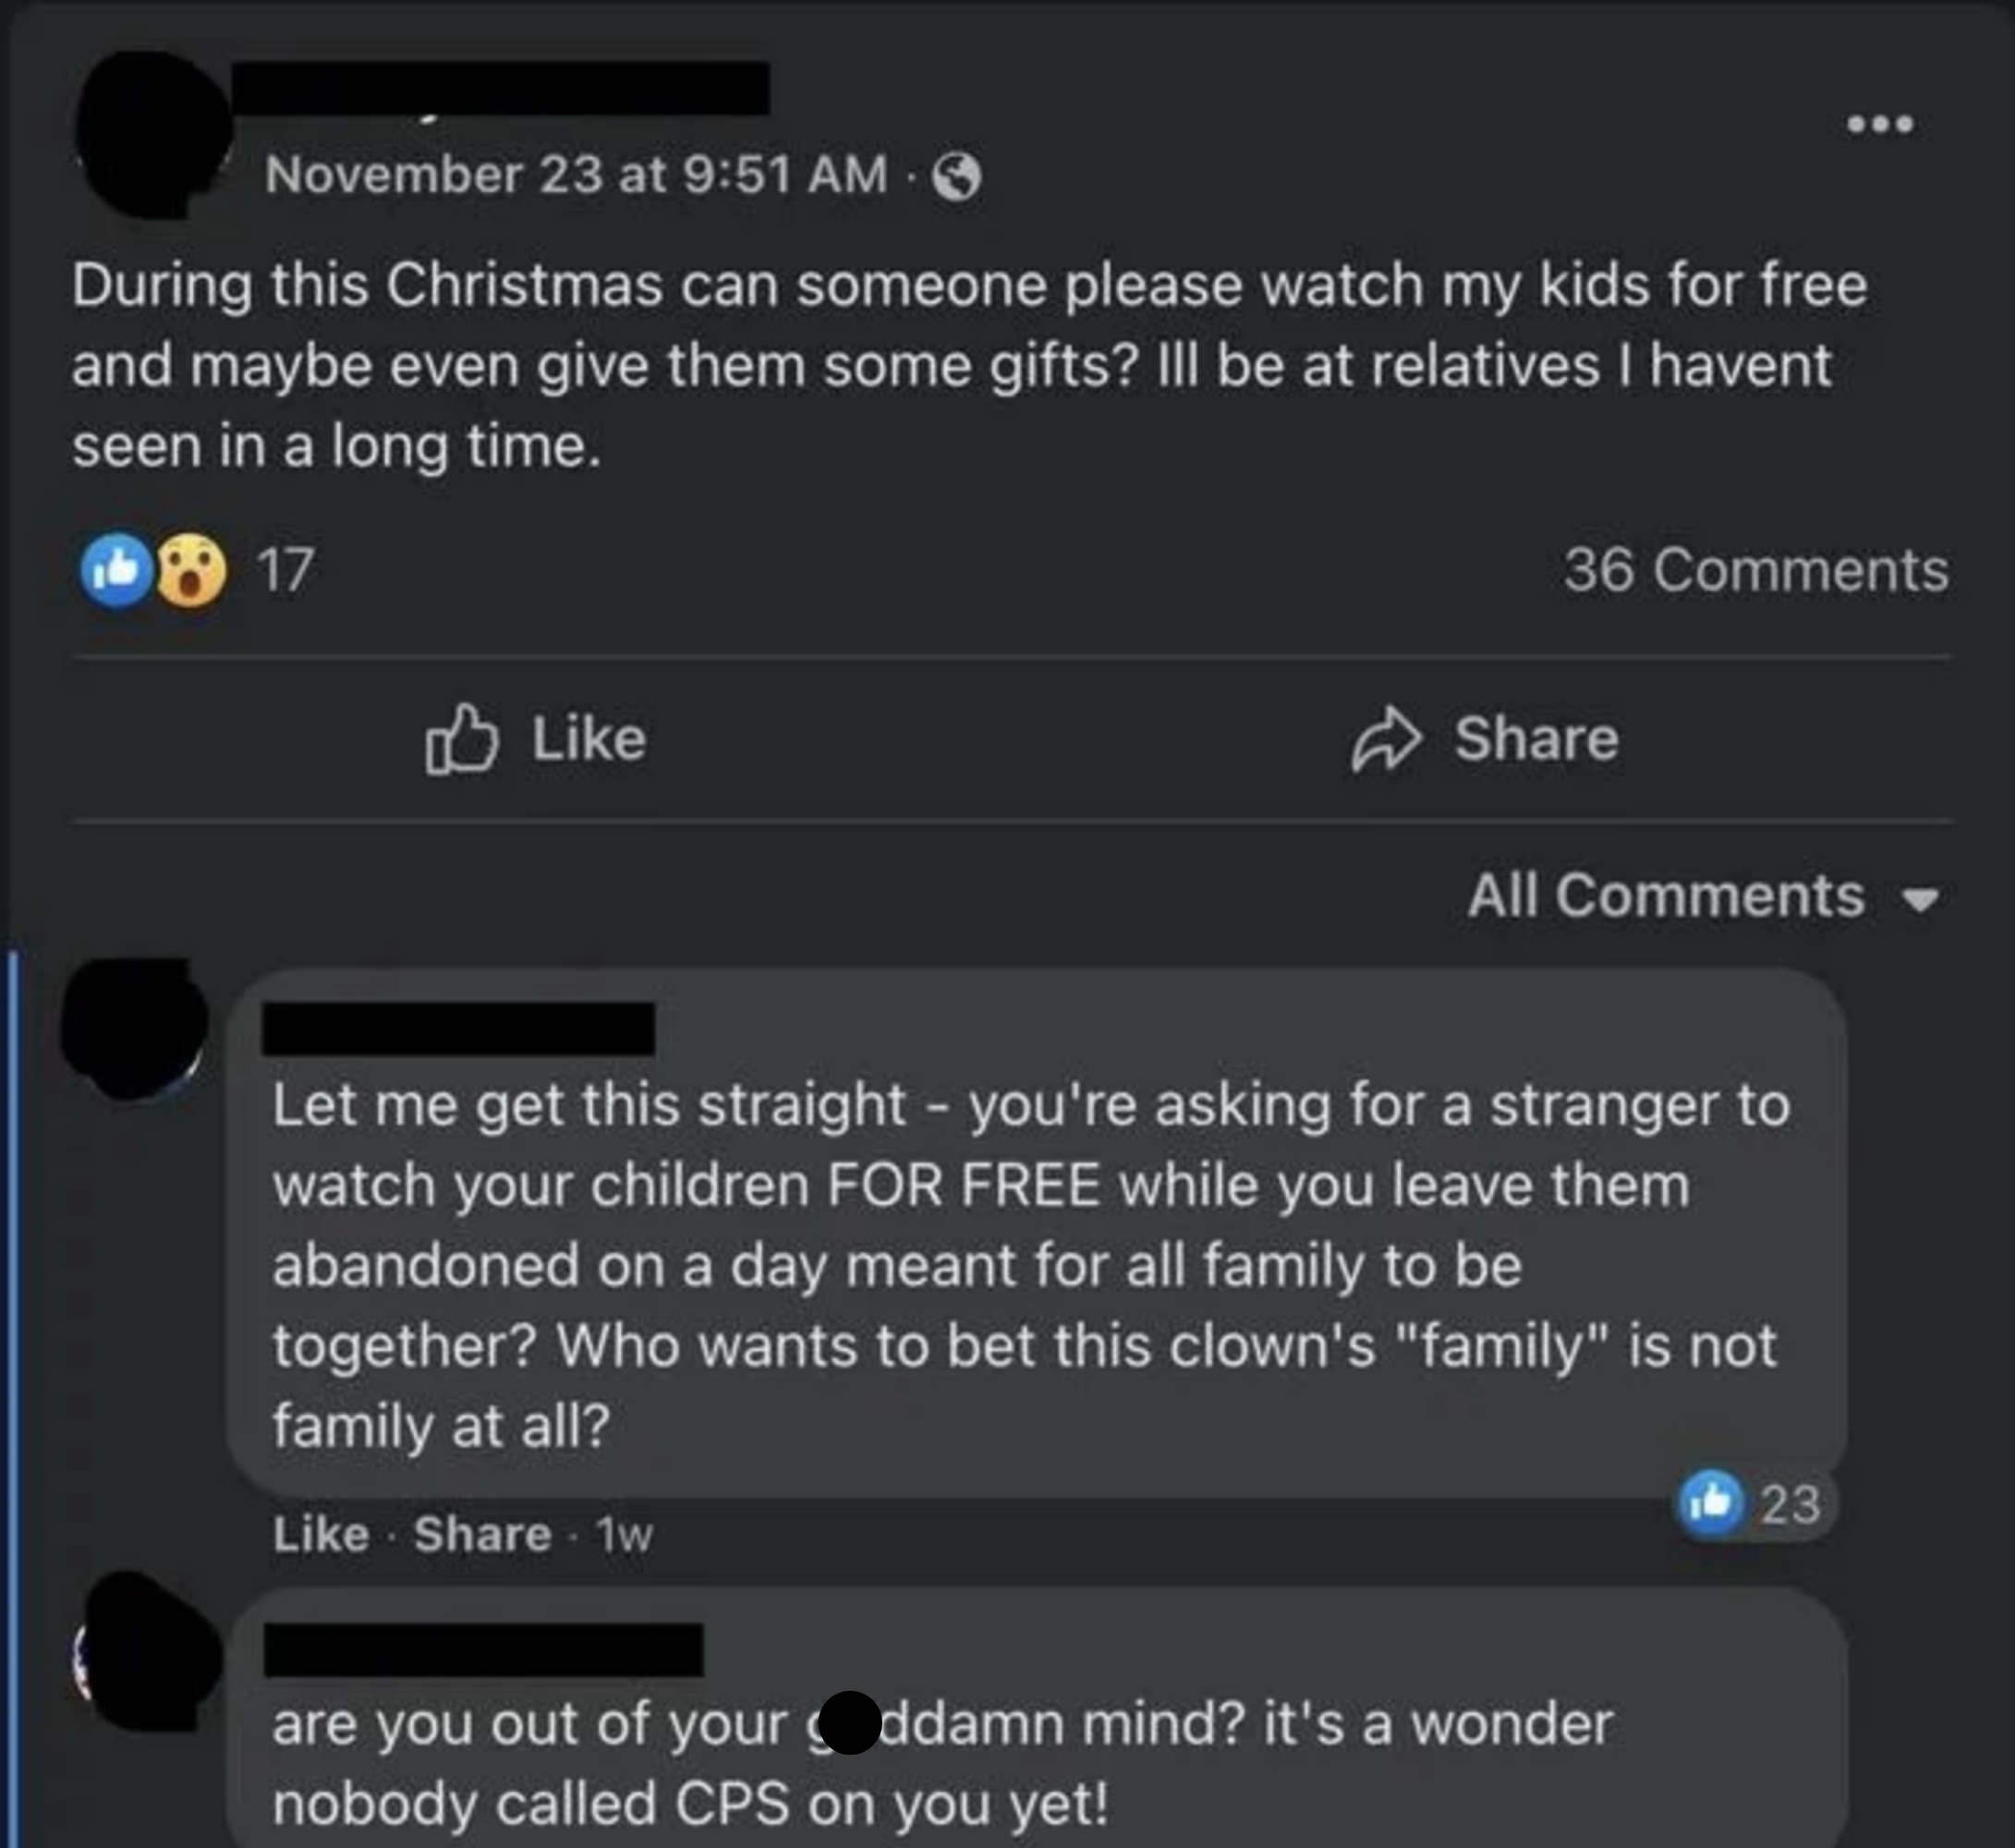 Person asks if someone can watch their kids for free and give them gifts because they&#x27;ll be w/relatives they haven&#x27;t seen in a while, and respondent says it&#x27;s a wonder nobody called CPS on them yet and the &quot;family&quot; probably isn&#x27;t family at all